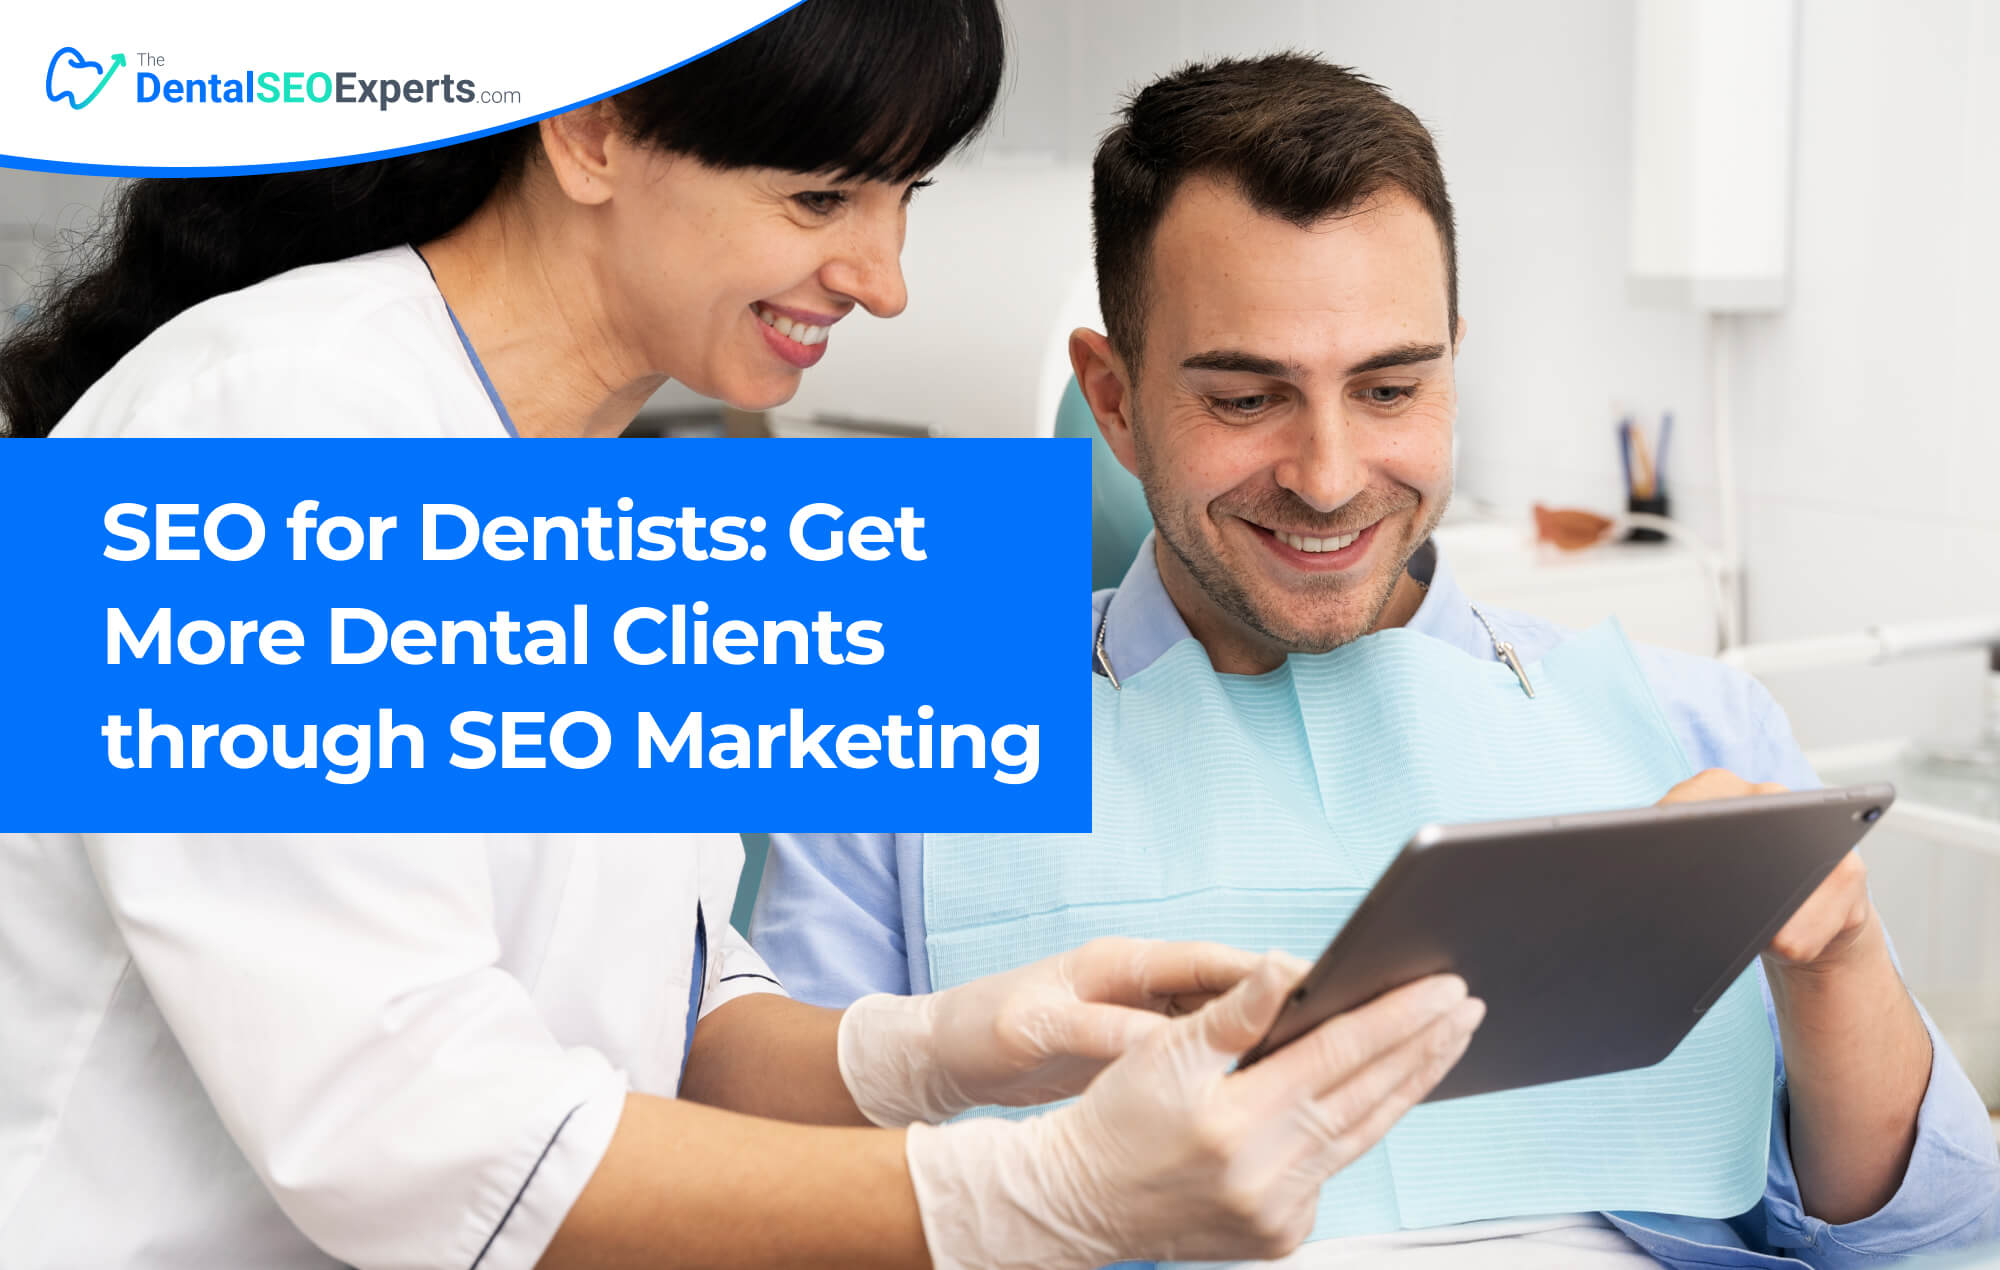 SEO for Dentists: Get More Dental Clients through SEO Marketing